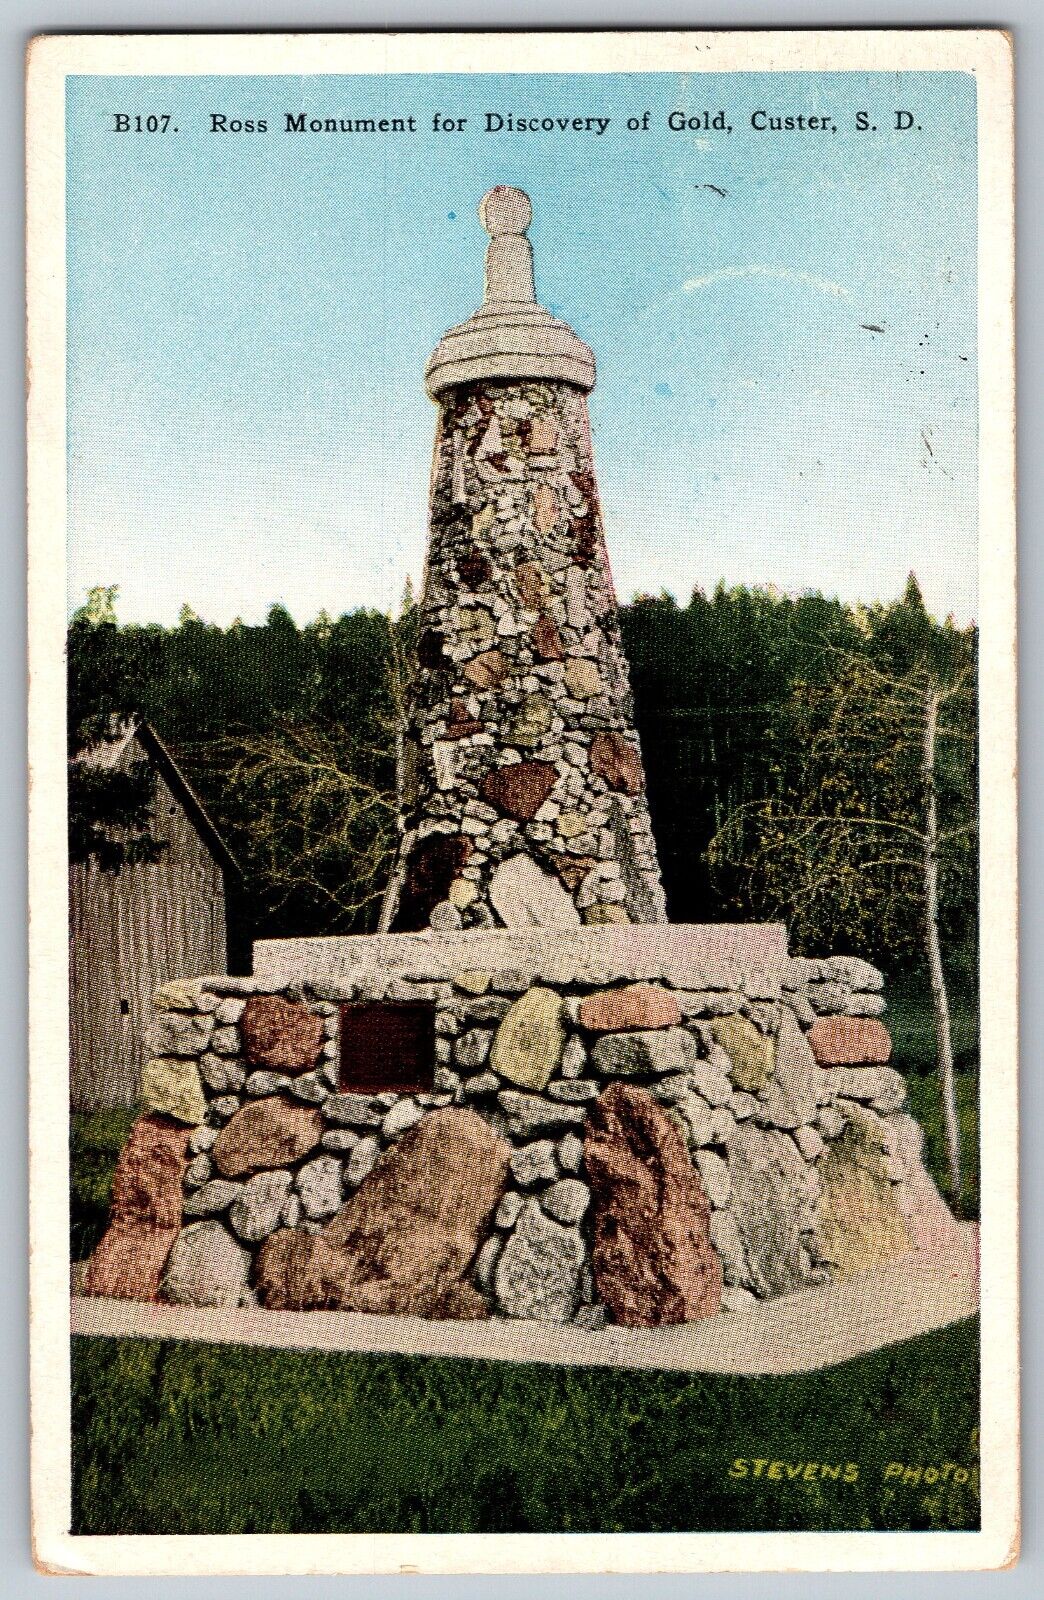 Custer, South Dakota - Ros Monument for Discovery of Gold - Vintage Postcard